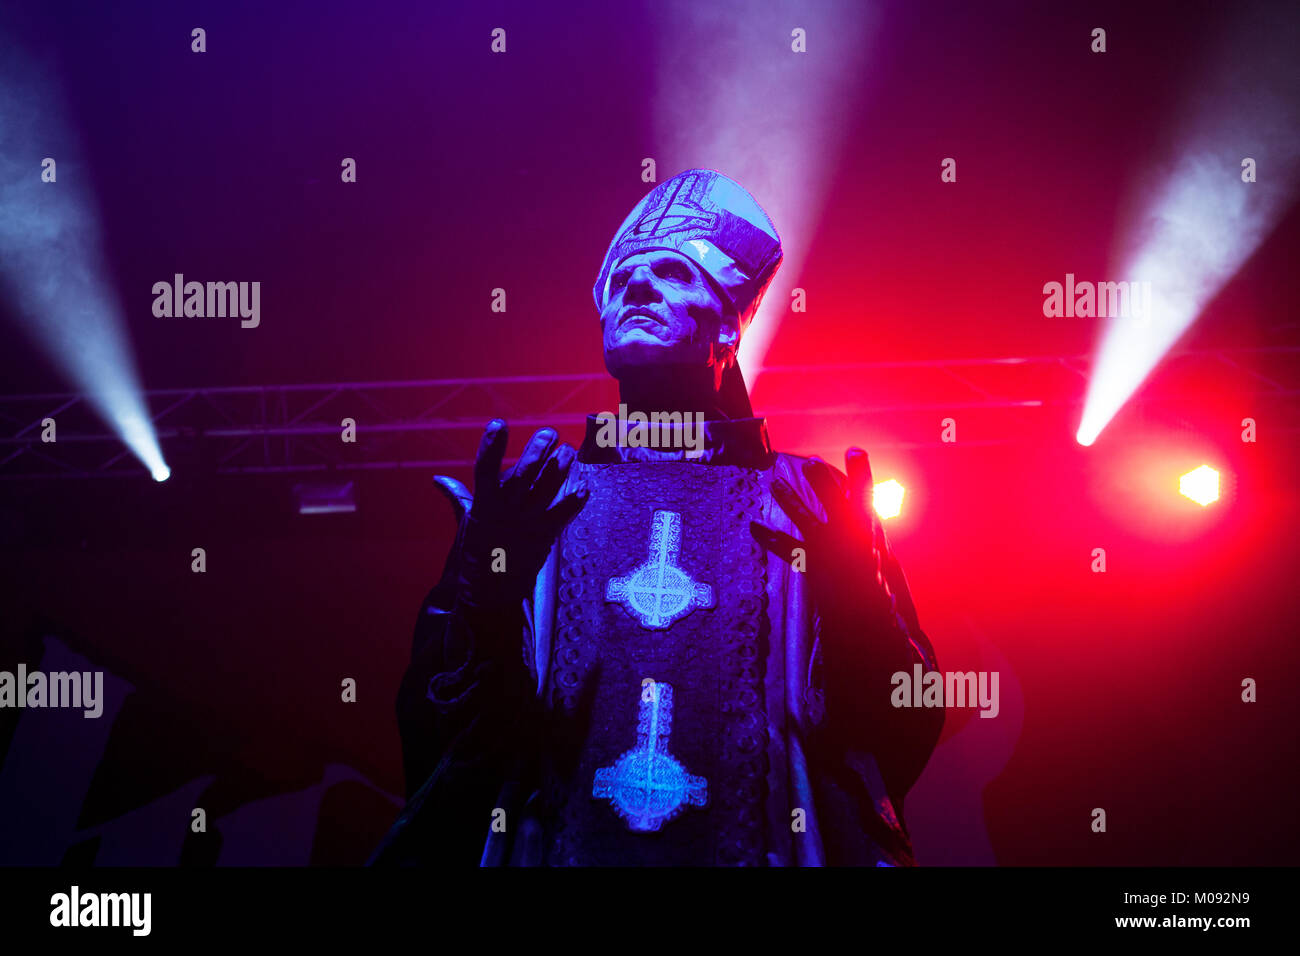 The Swedish heavy metal band Ghost performs a live concert at the Manchester Academy. The band’s vocalist Papa Emeritus II wears skull make-up and is dressed as a Roman Catholic pope and is here pictured live on stage. United Kingdom, 11/11 2013. Stock Photo